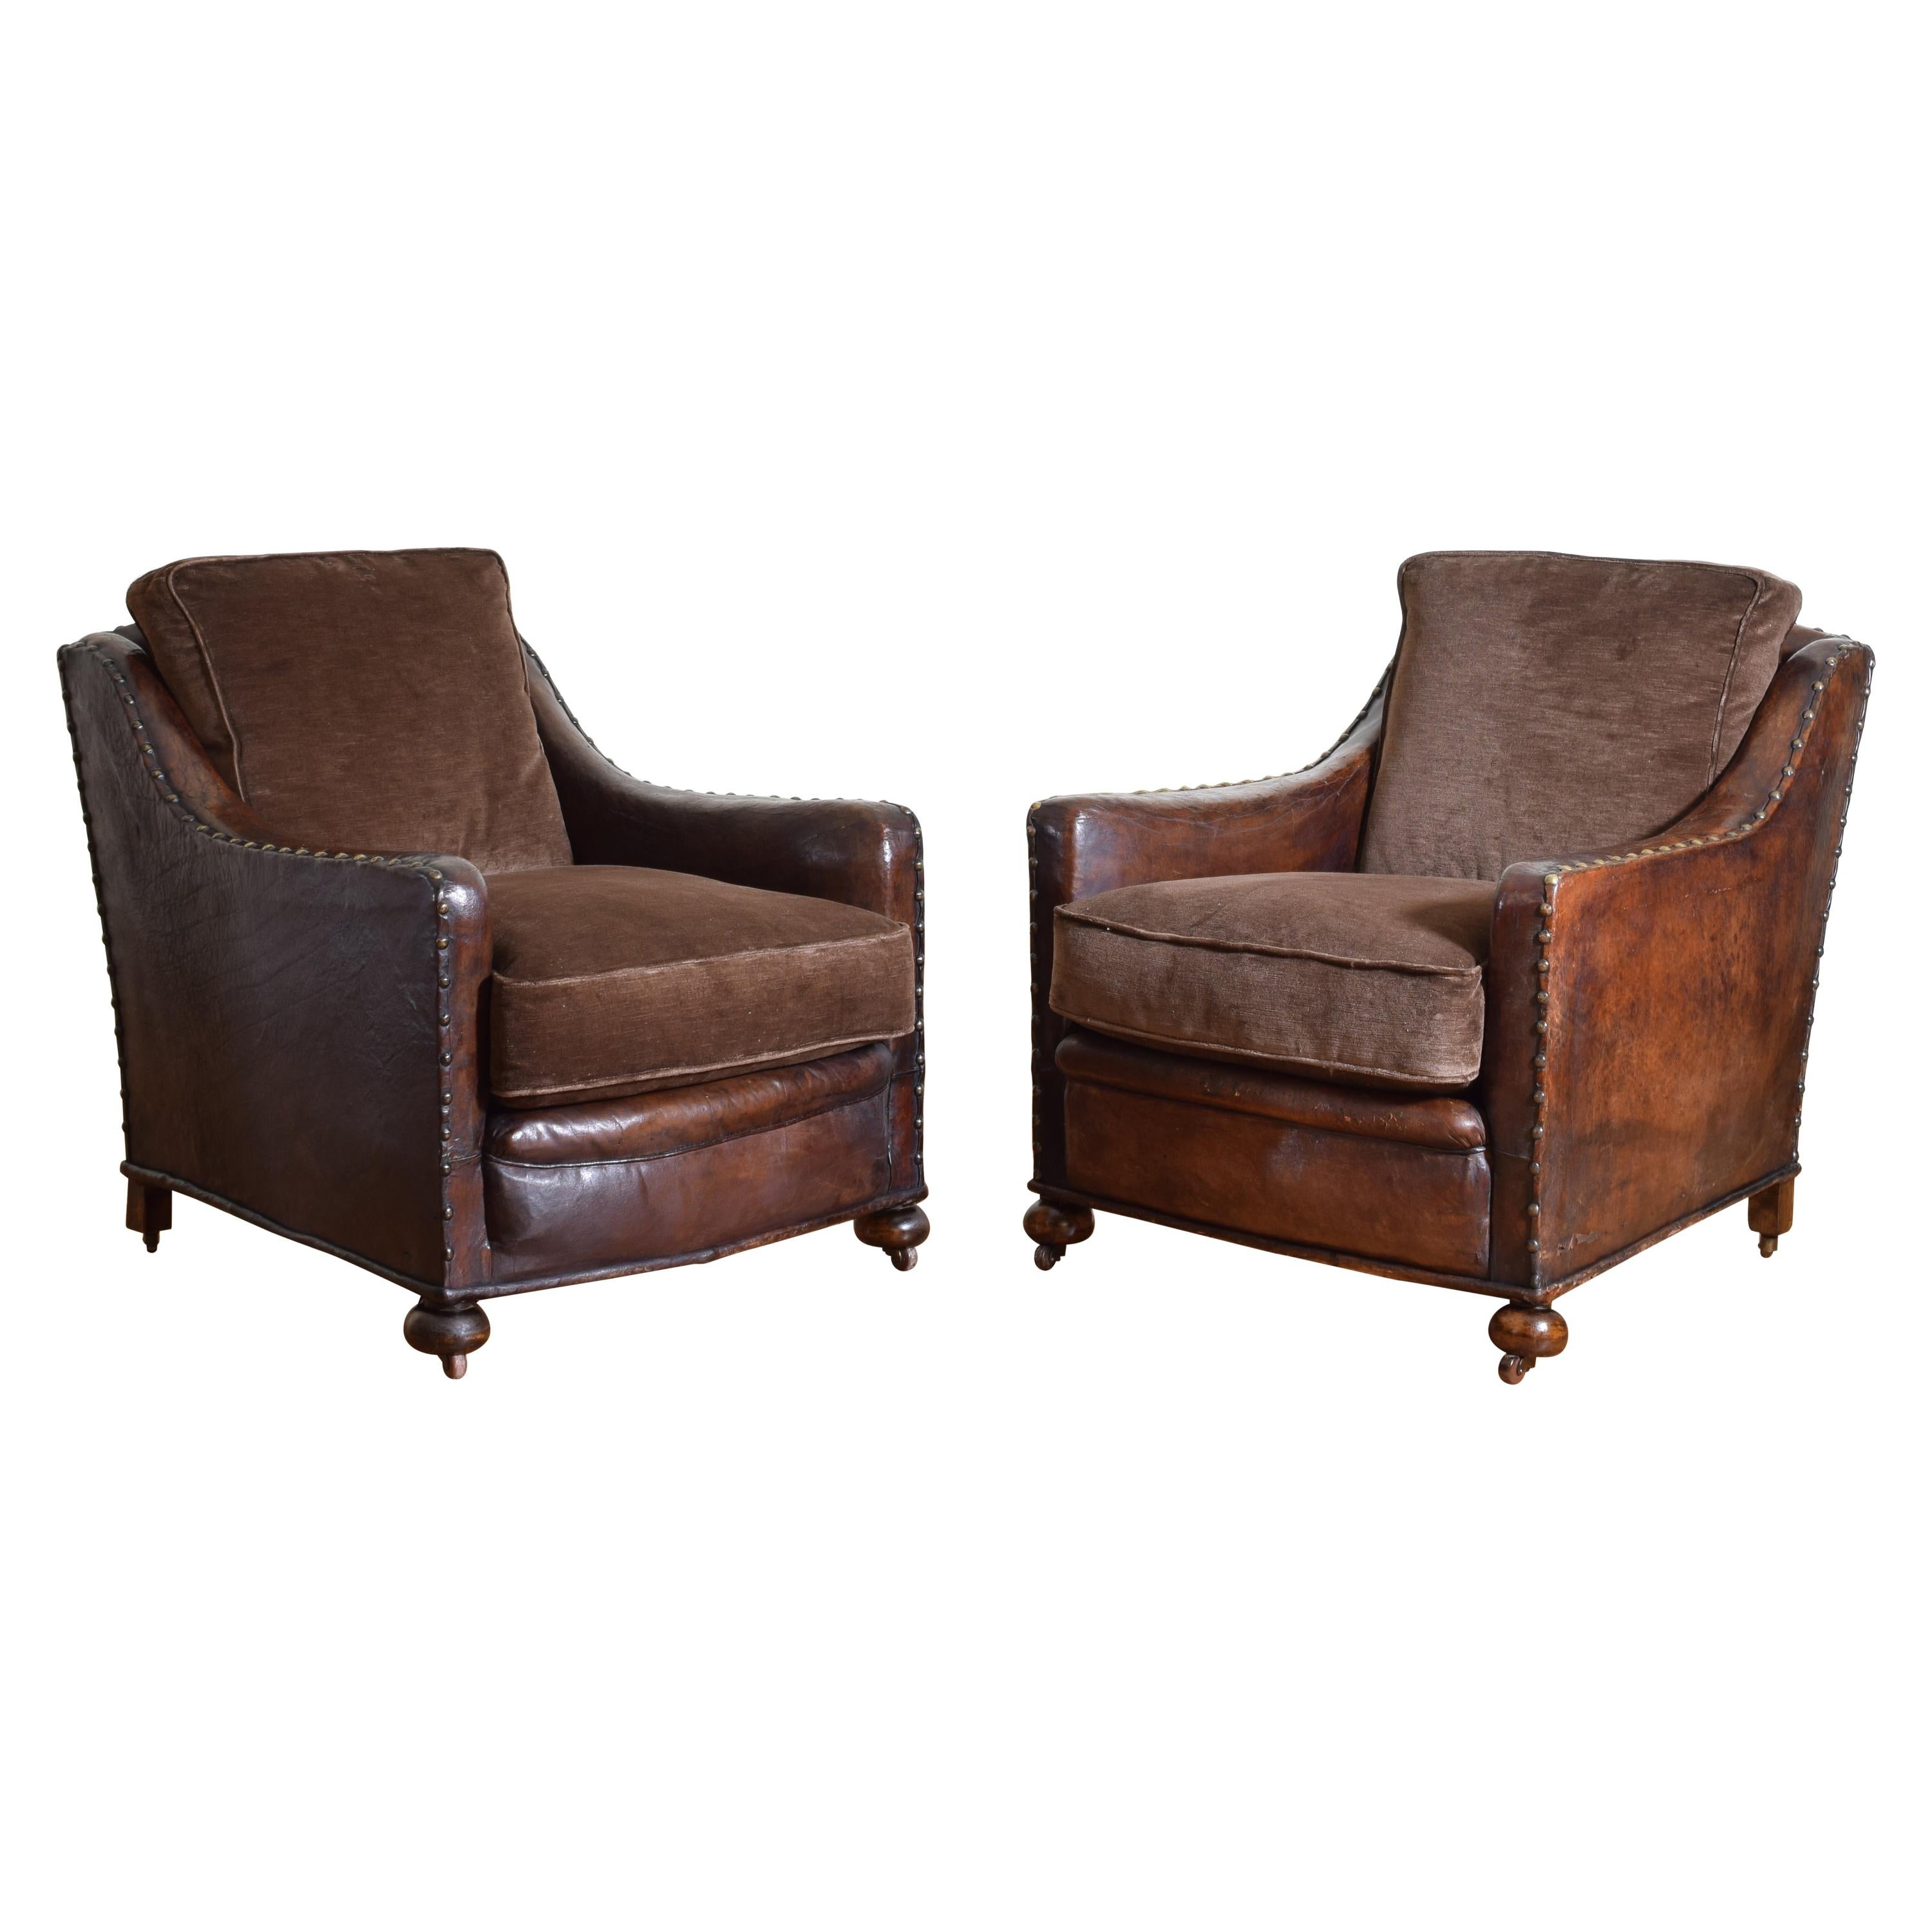 Pair of French Art Deco Period Leather and Velvet Upholstered Club Chairs